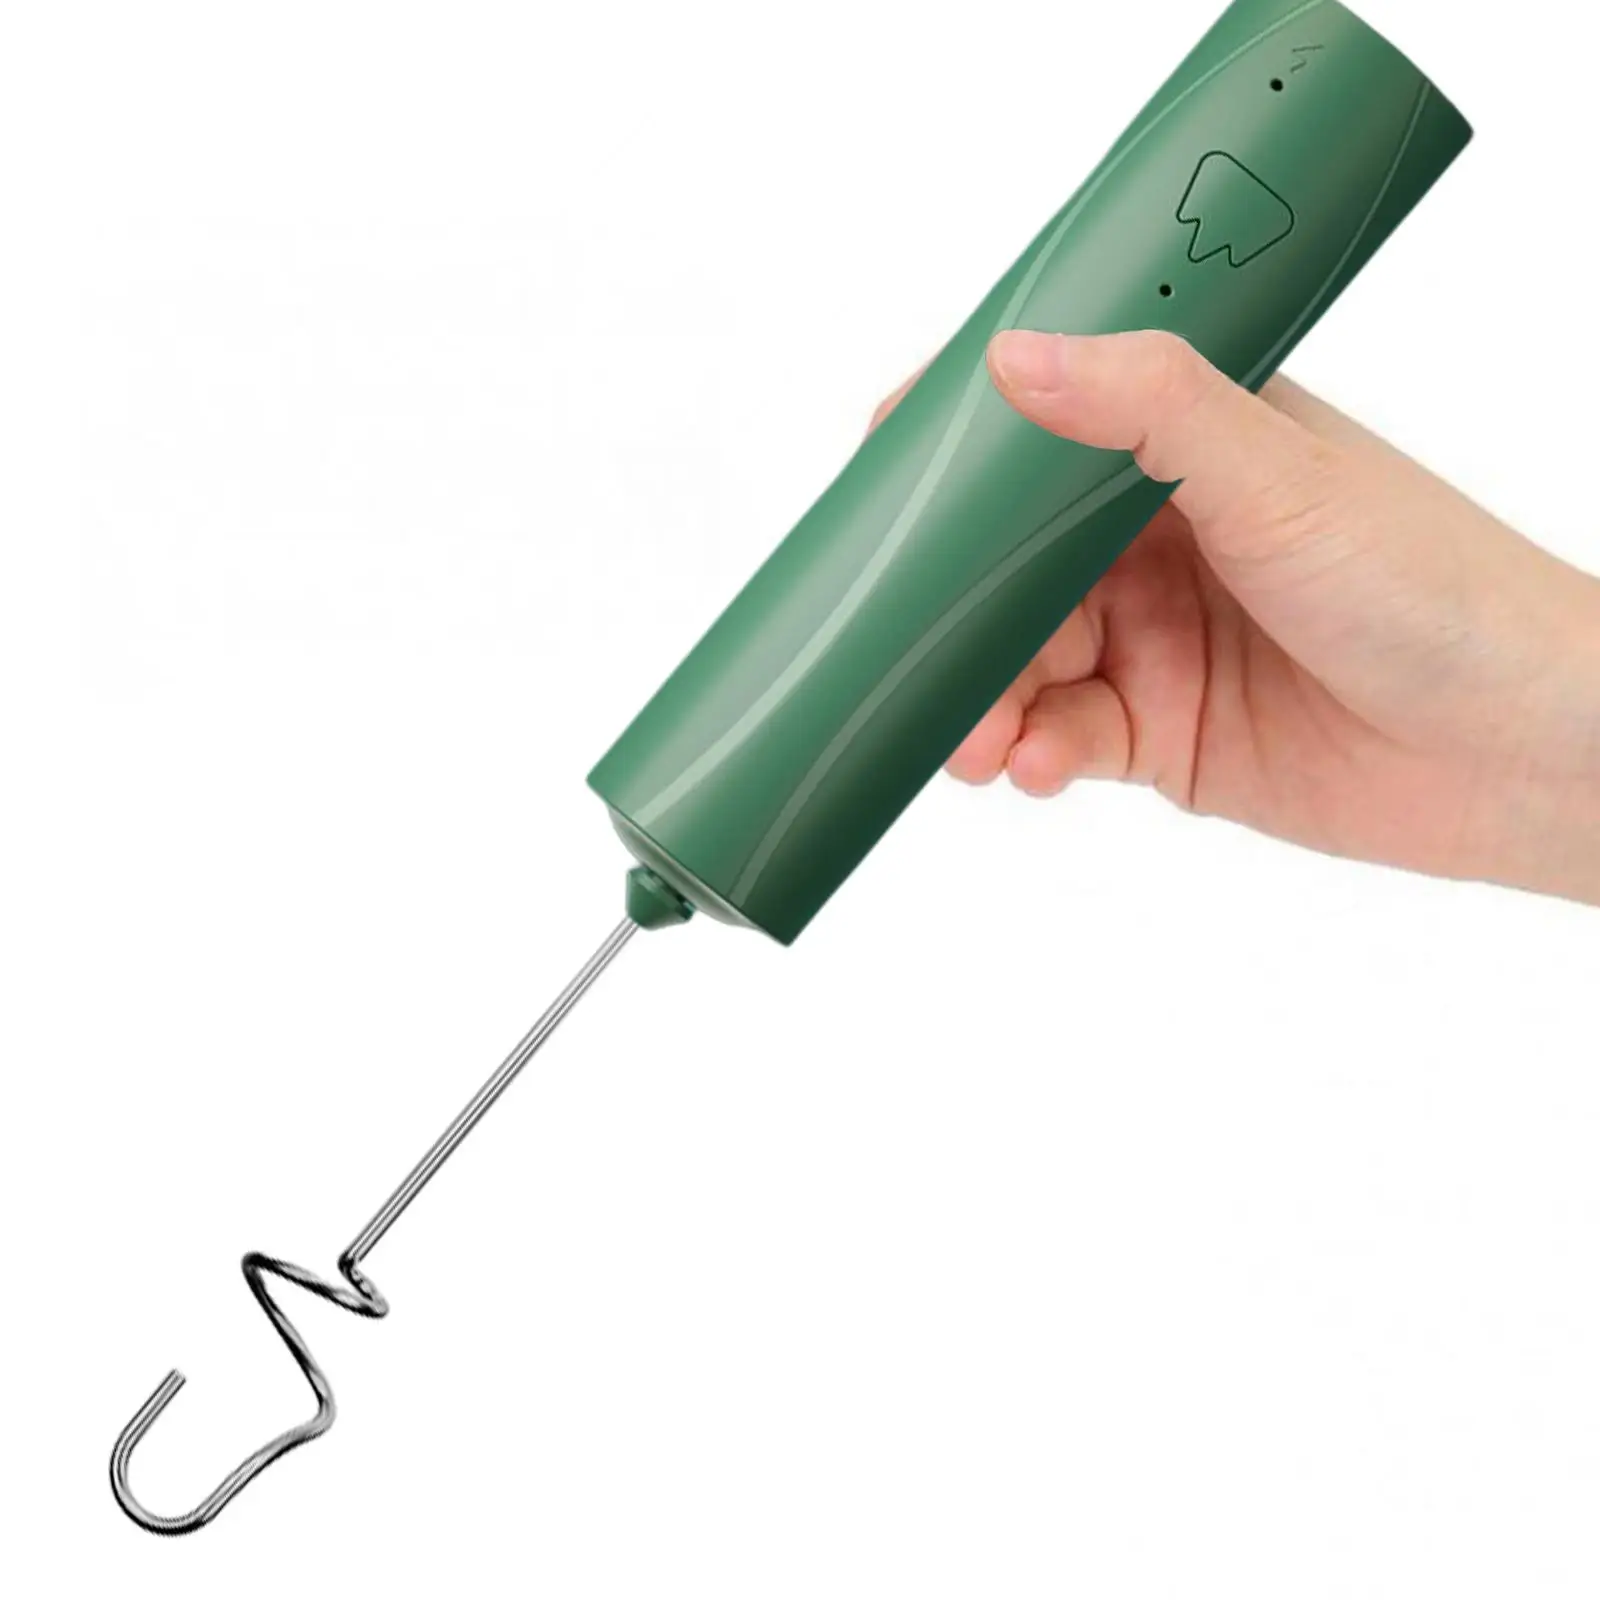 Portable Milk Frother USB Coffee Frother Whisk Coffee for Cappuccino Coffee